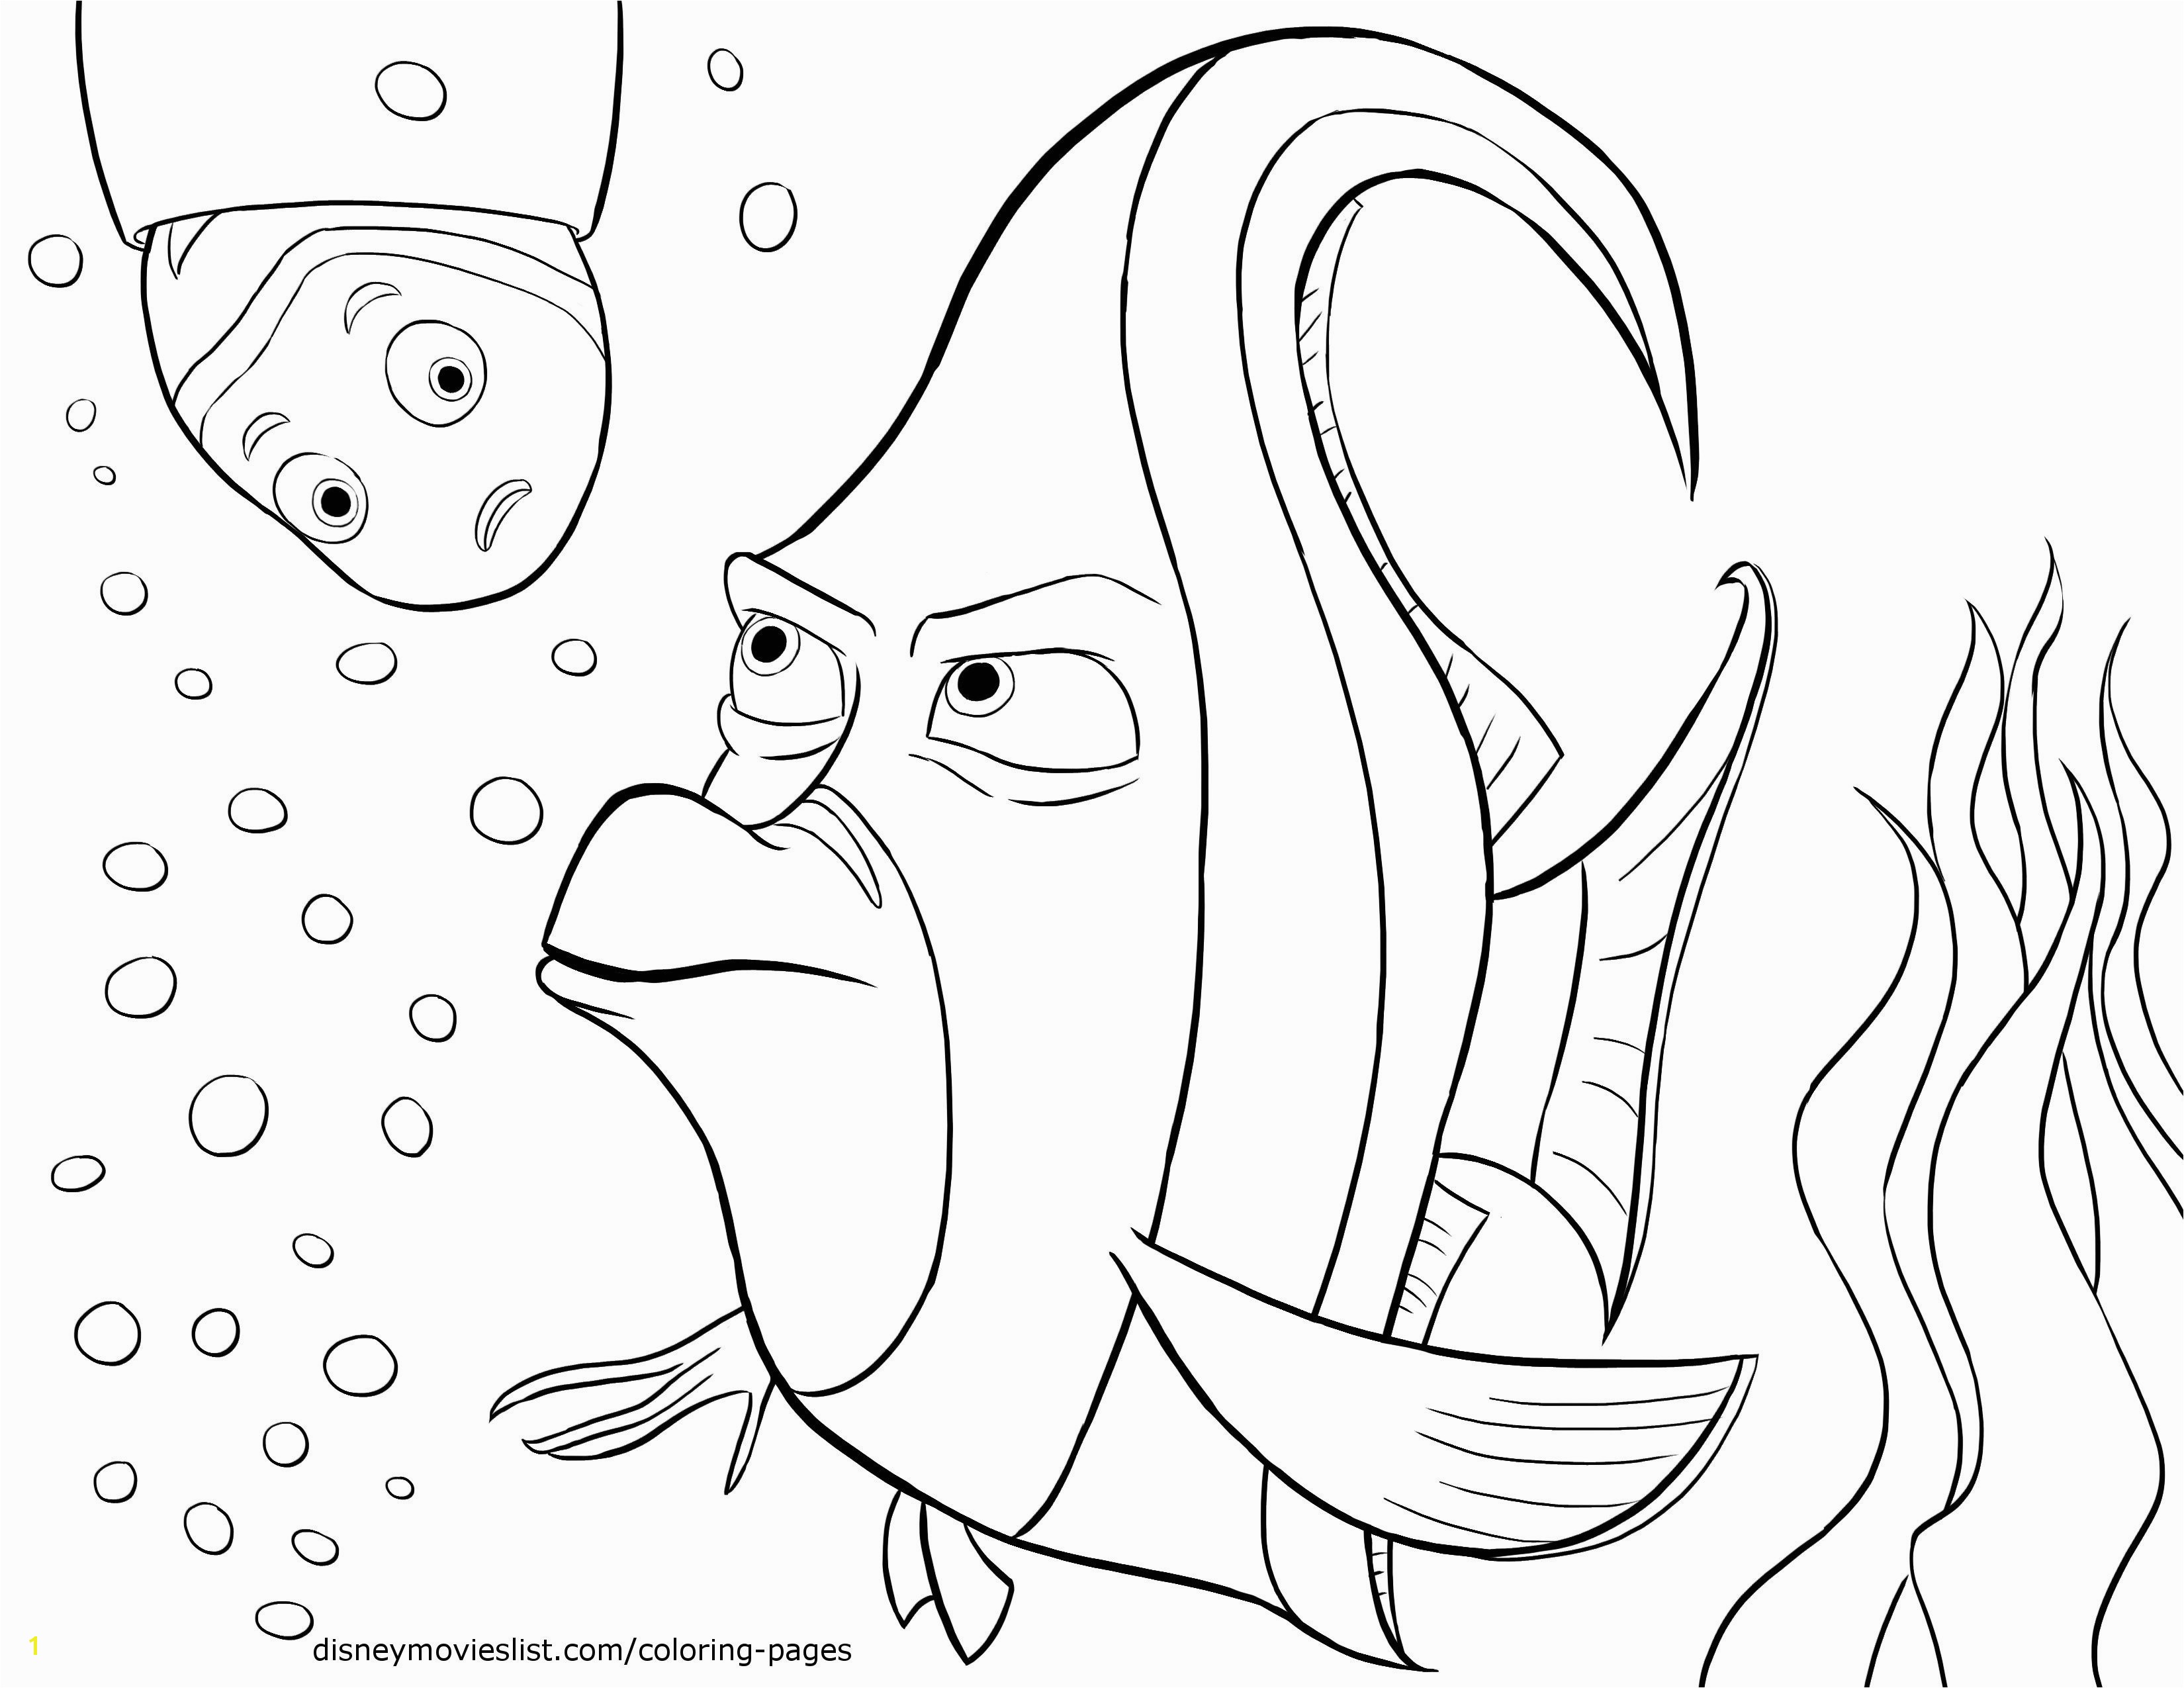 Nemo Coloring Pages Free Finding Dory Coloring Pages Beautiful Free Finding Nemo